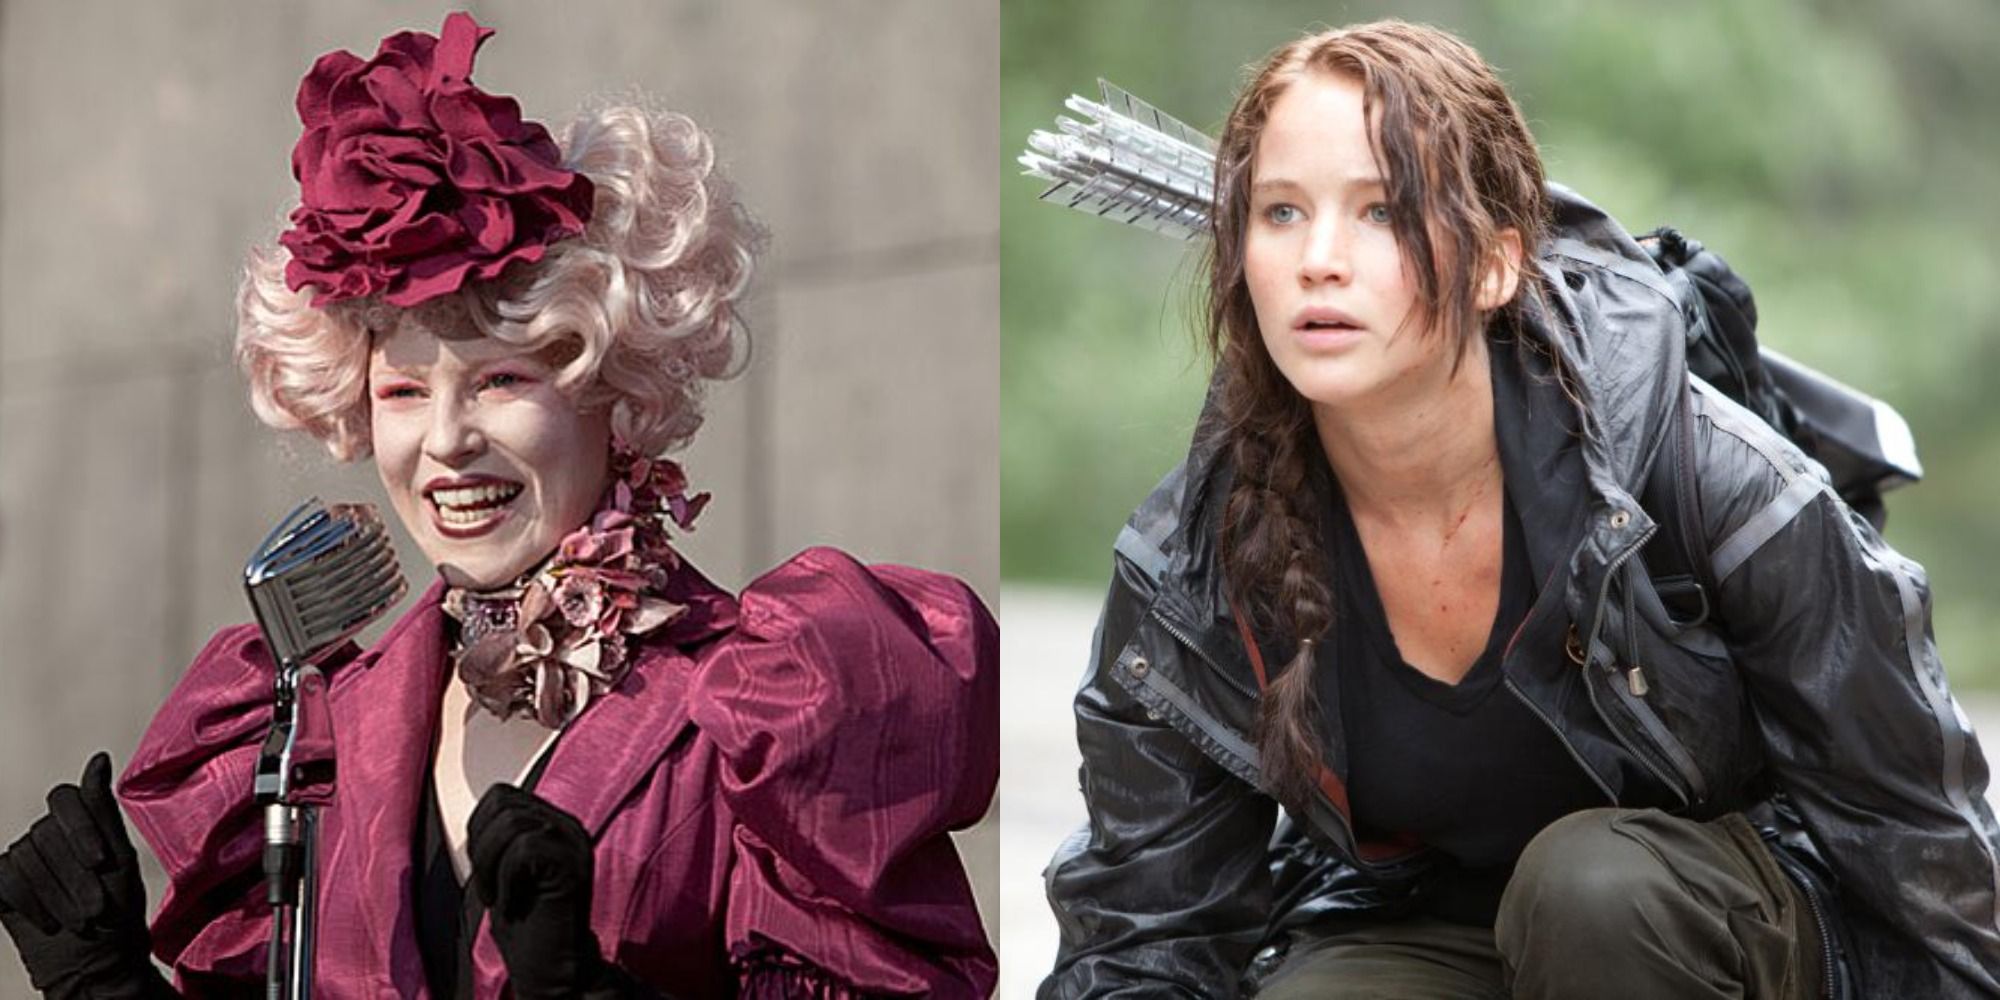 The split image showing Effie and Katniss in The Hunger Games